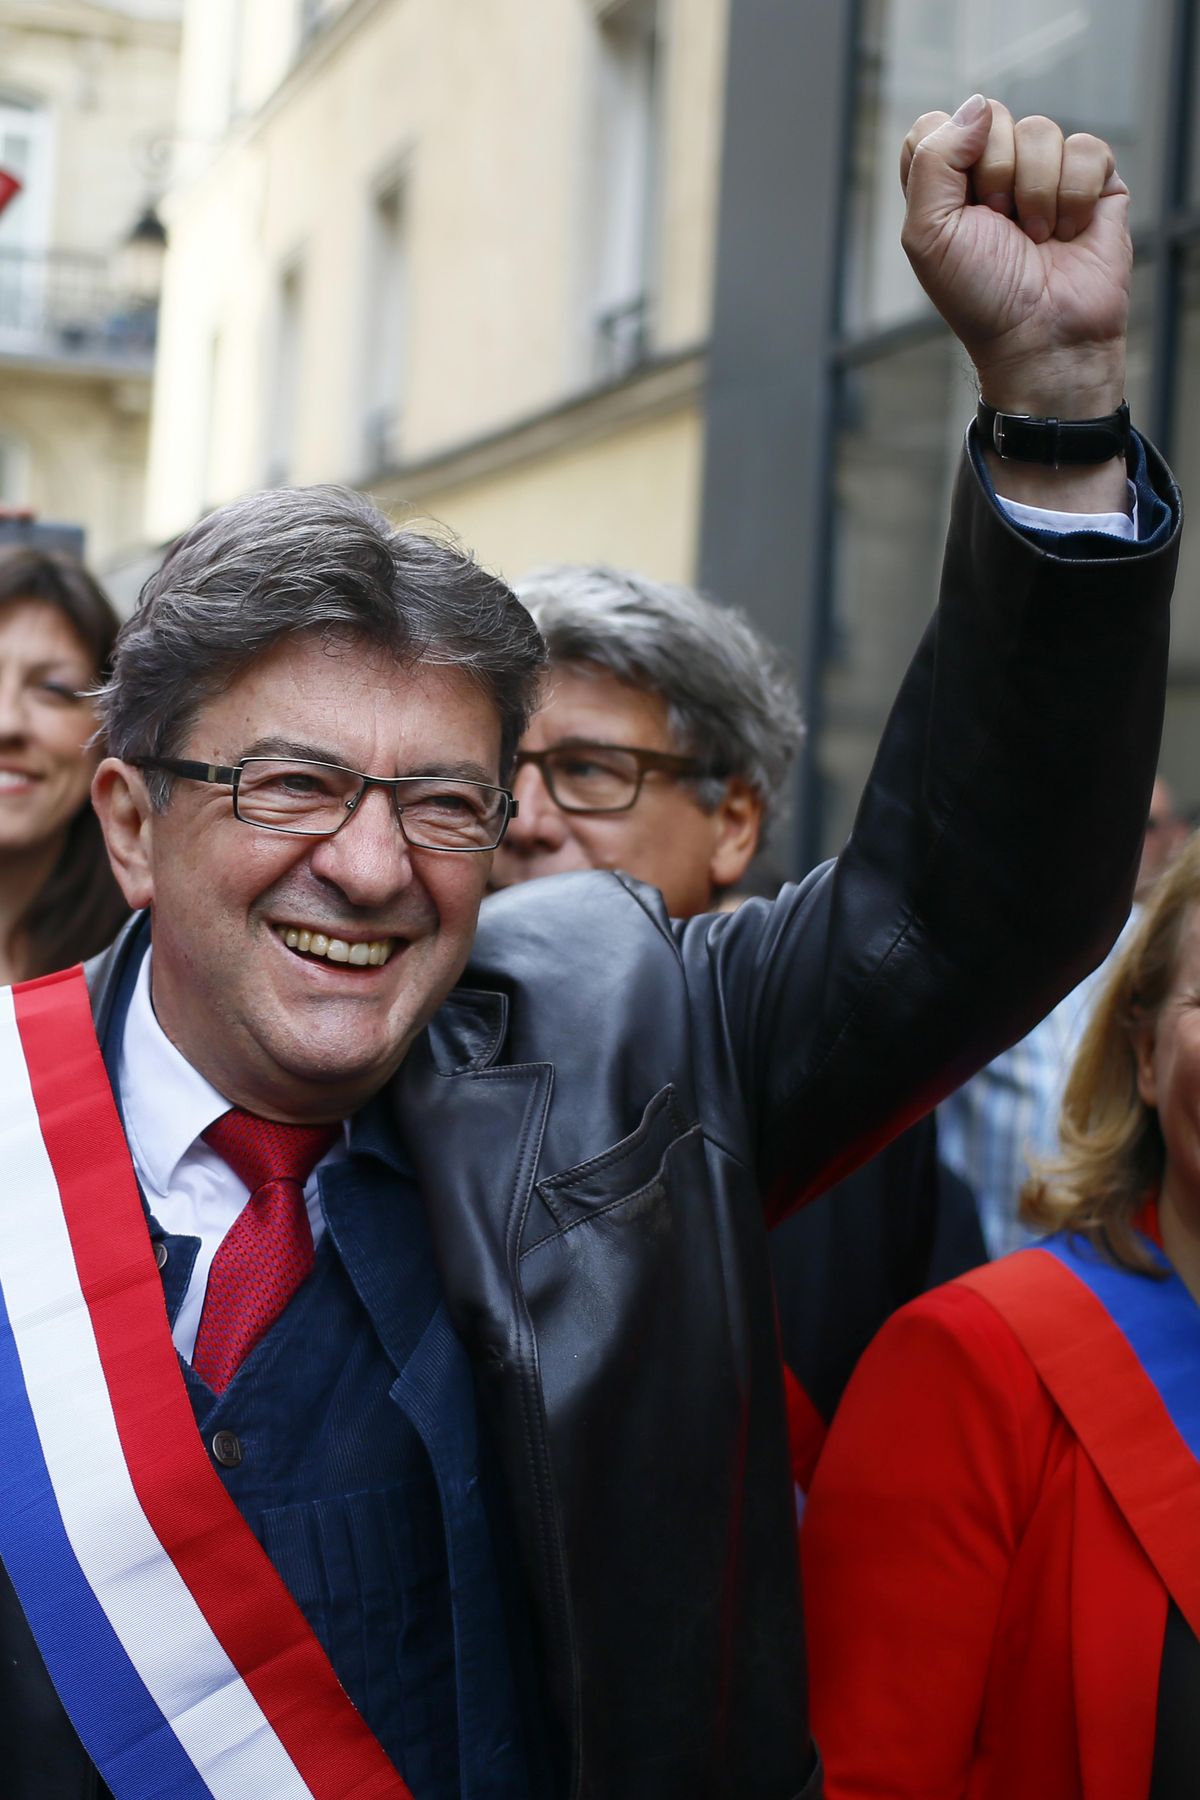 French far-left leader Jean-Luc Melenchon greets supporters as he arrives to take part in a demonstration in Paris, France, Saturday, Sept. 23, 2017. Melenchon is rallying disaffected voters against President Emmanuel Macron’s proposals to reduce worker protections, amid spreading discontent with his presidency and his vision for a more market-friendly economy. (Francois Mori / Associated Press)